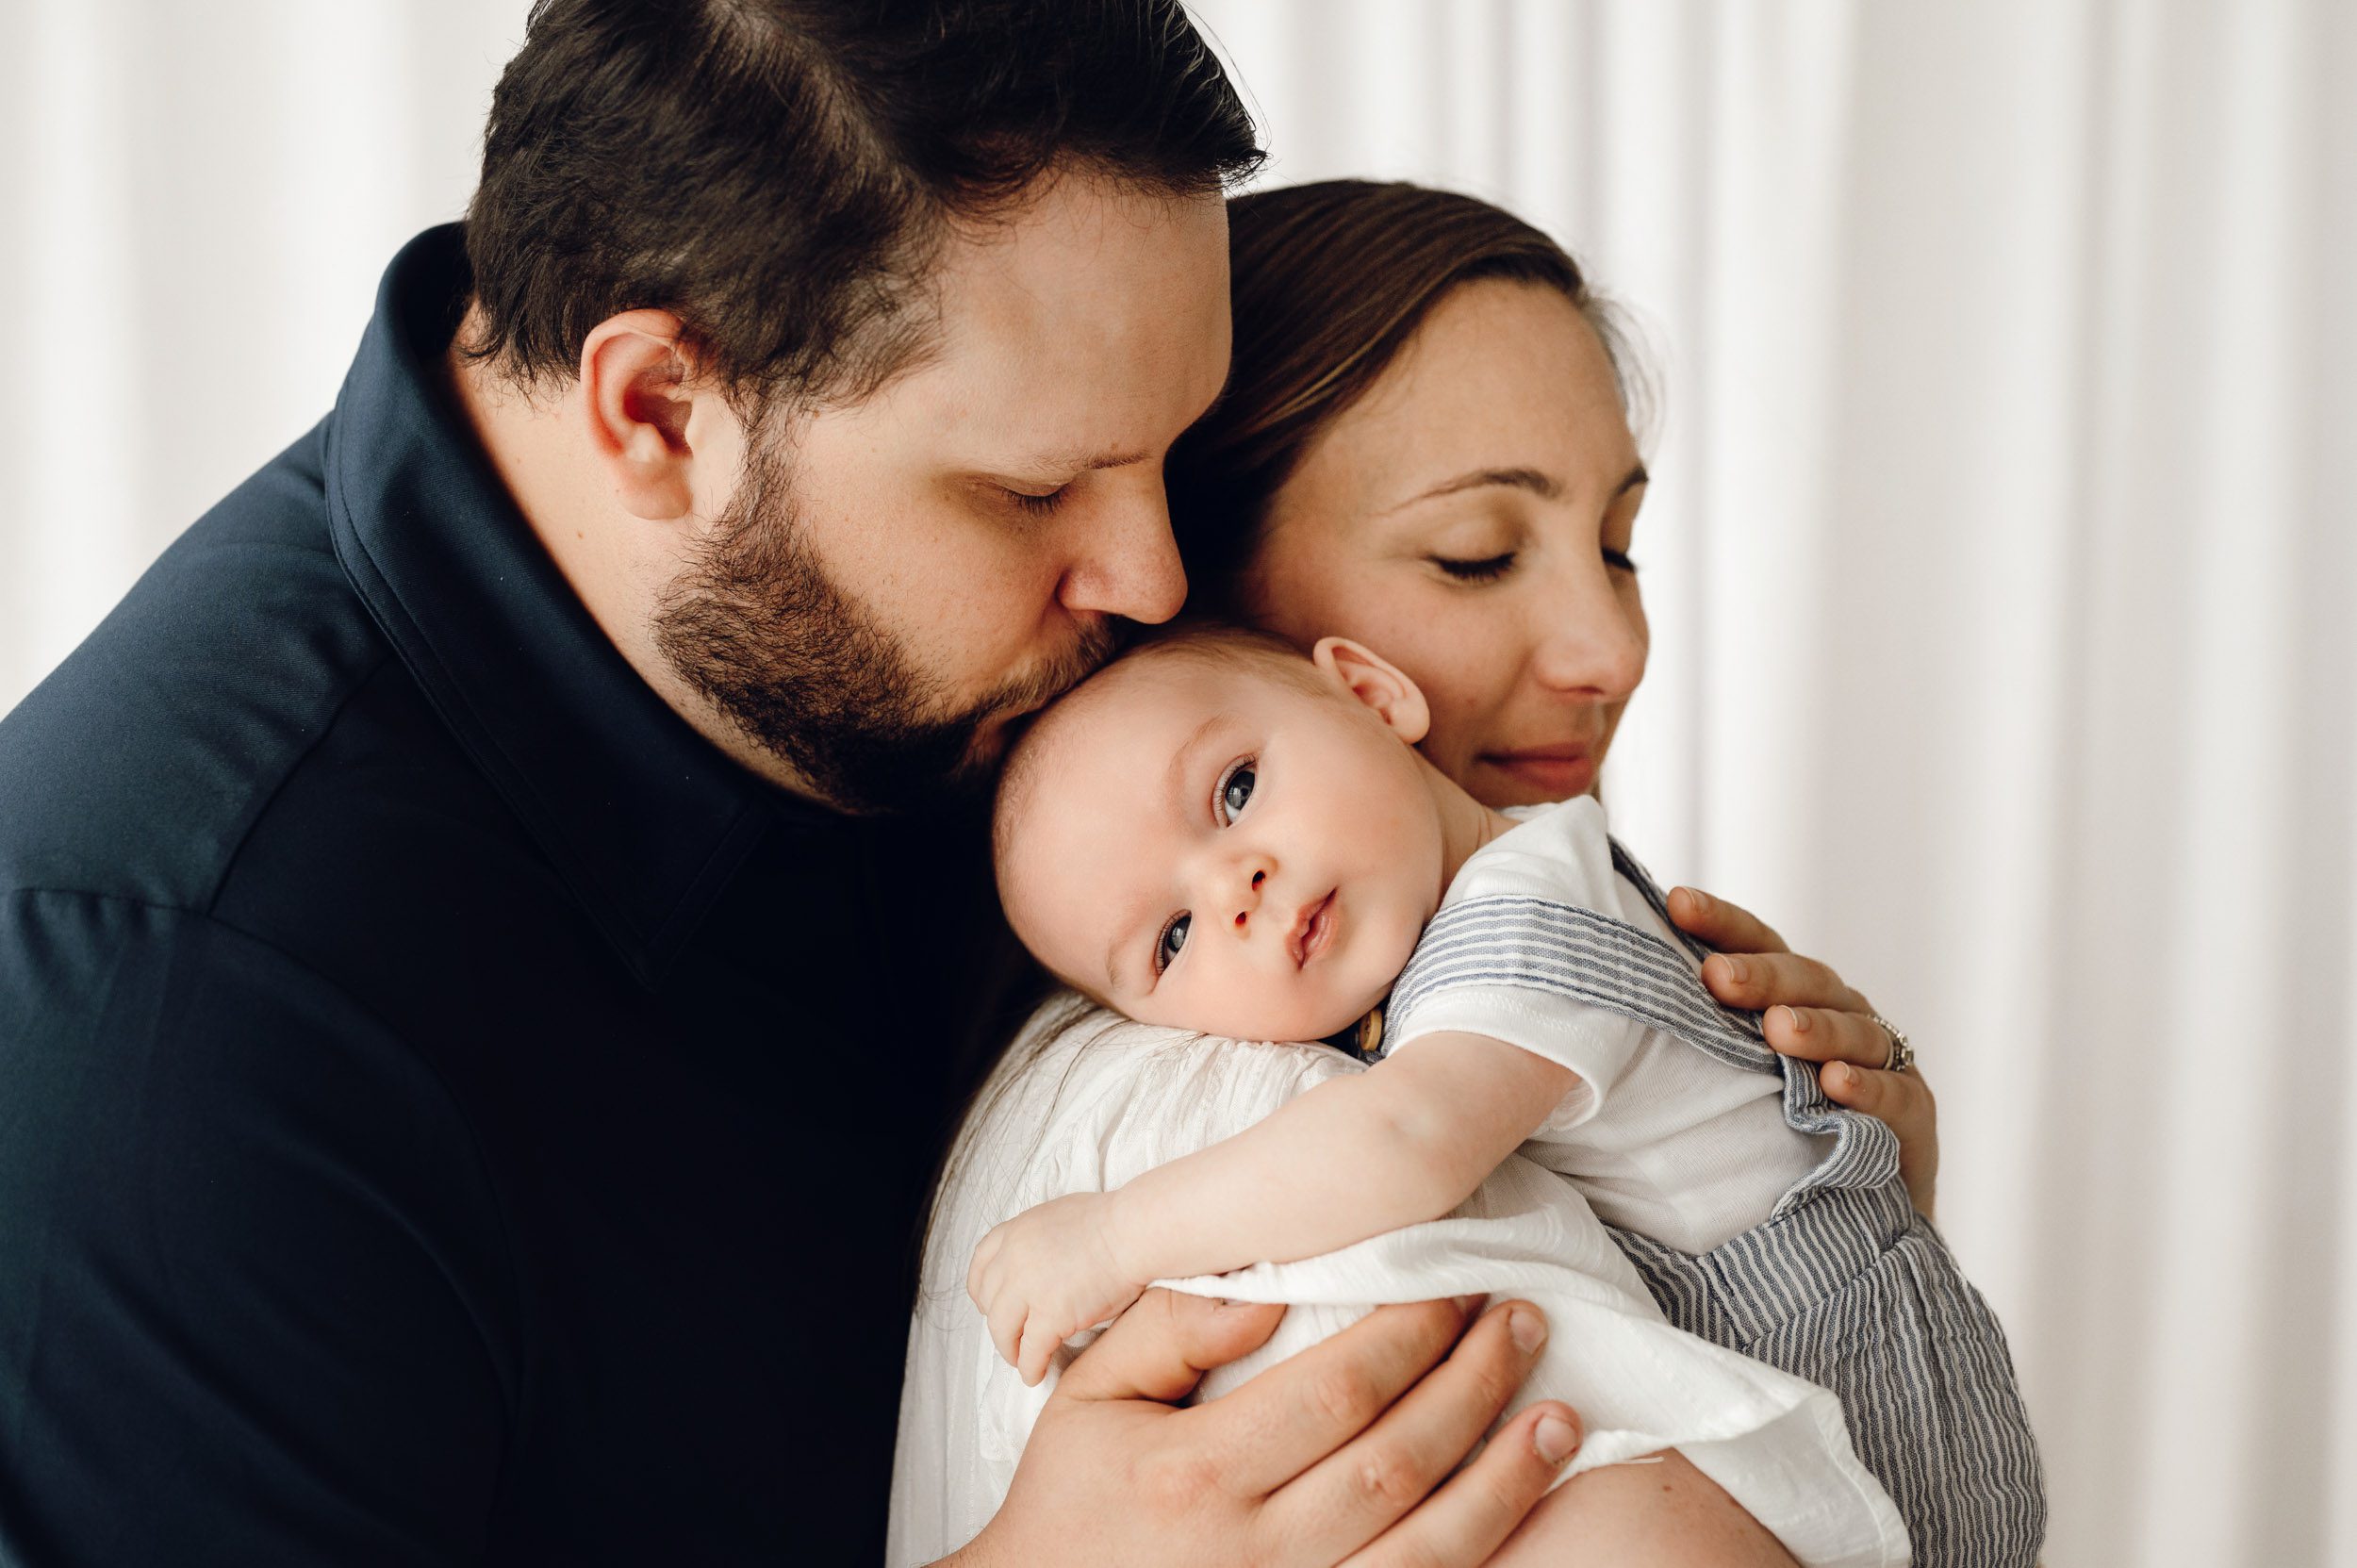 a new mom holding her baby boy against her chest as dad hugs her from behind and kisses his sown on the head while the baby looks directly at the camera during a newborn photos session